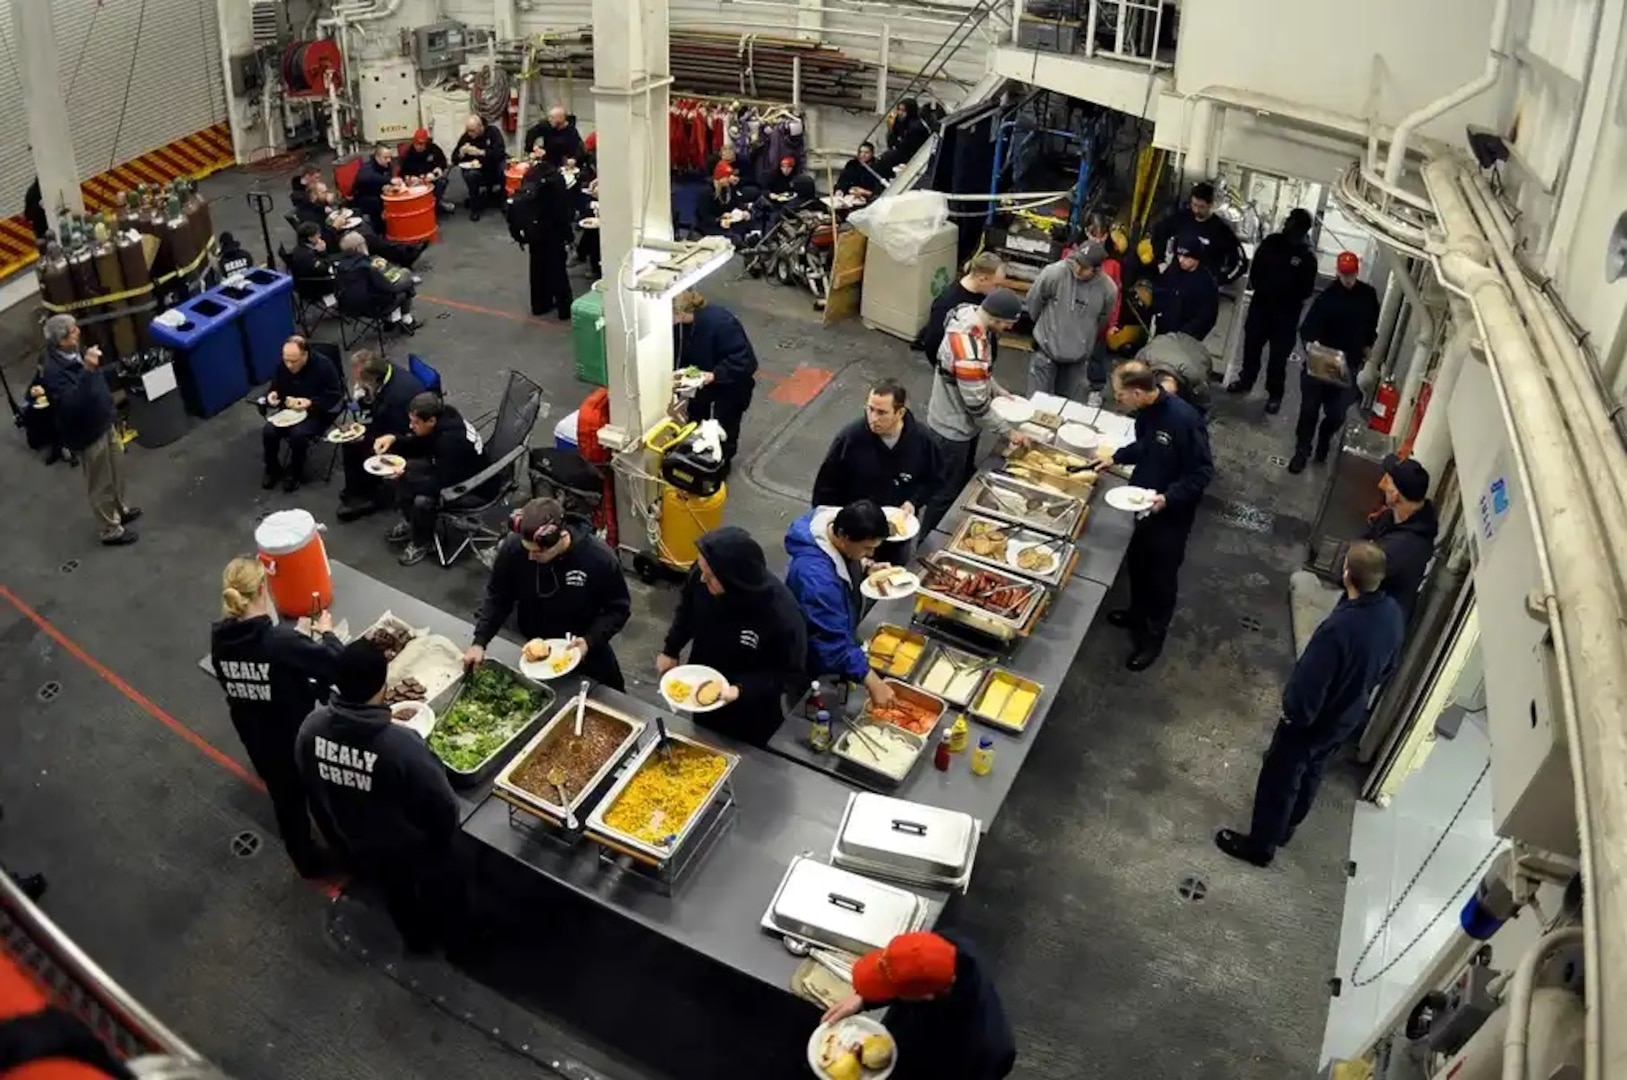 The crew and science team aboard the Coast Guard Cutter Healy conclude a morale day with a cook out in the hangar Sept. 2, 2009.

(U.S. Coast Guard photo by Petty Officer Patrick Kelley)